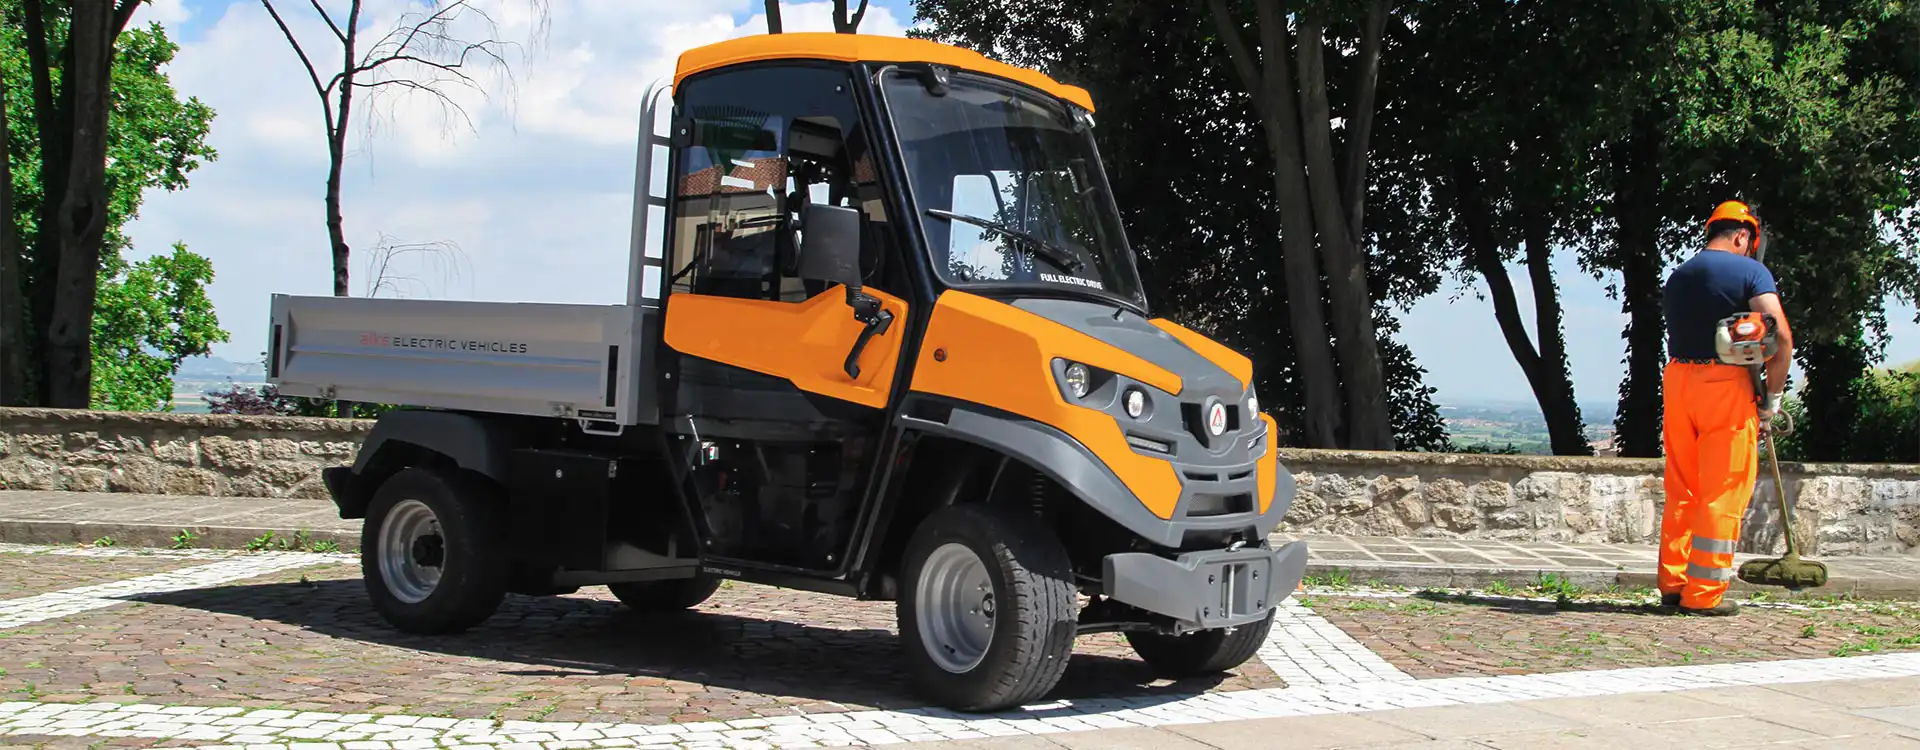 Electric vehicles for Public sector - Ecological, quiet and with high autonomy